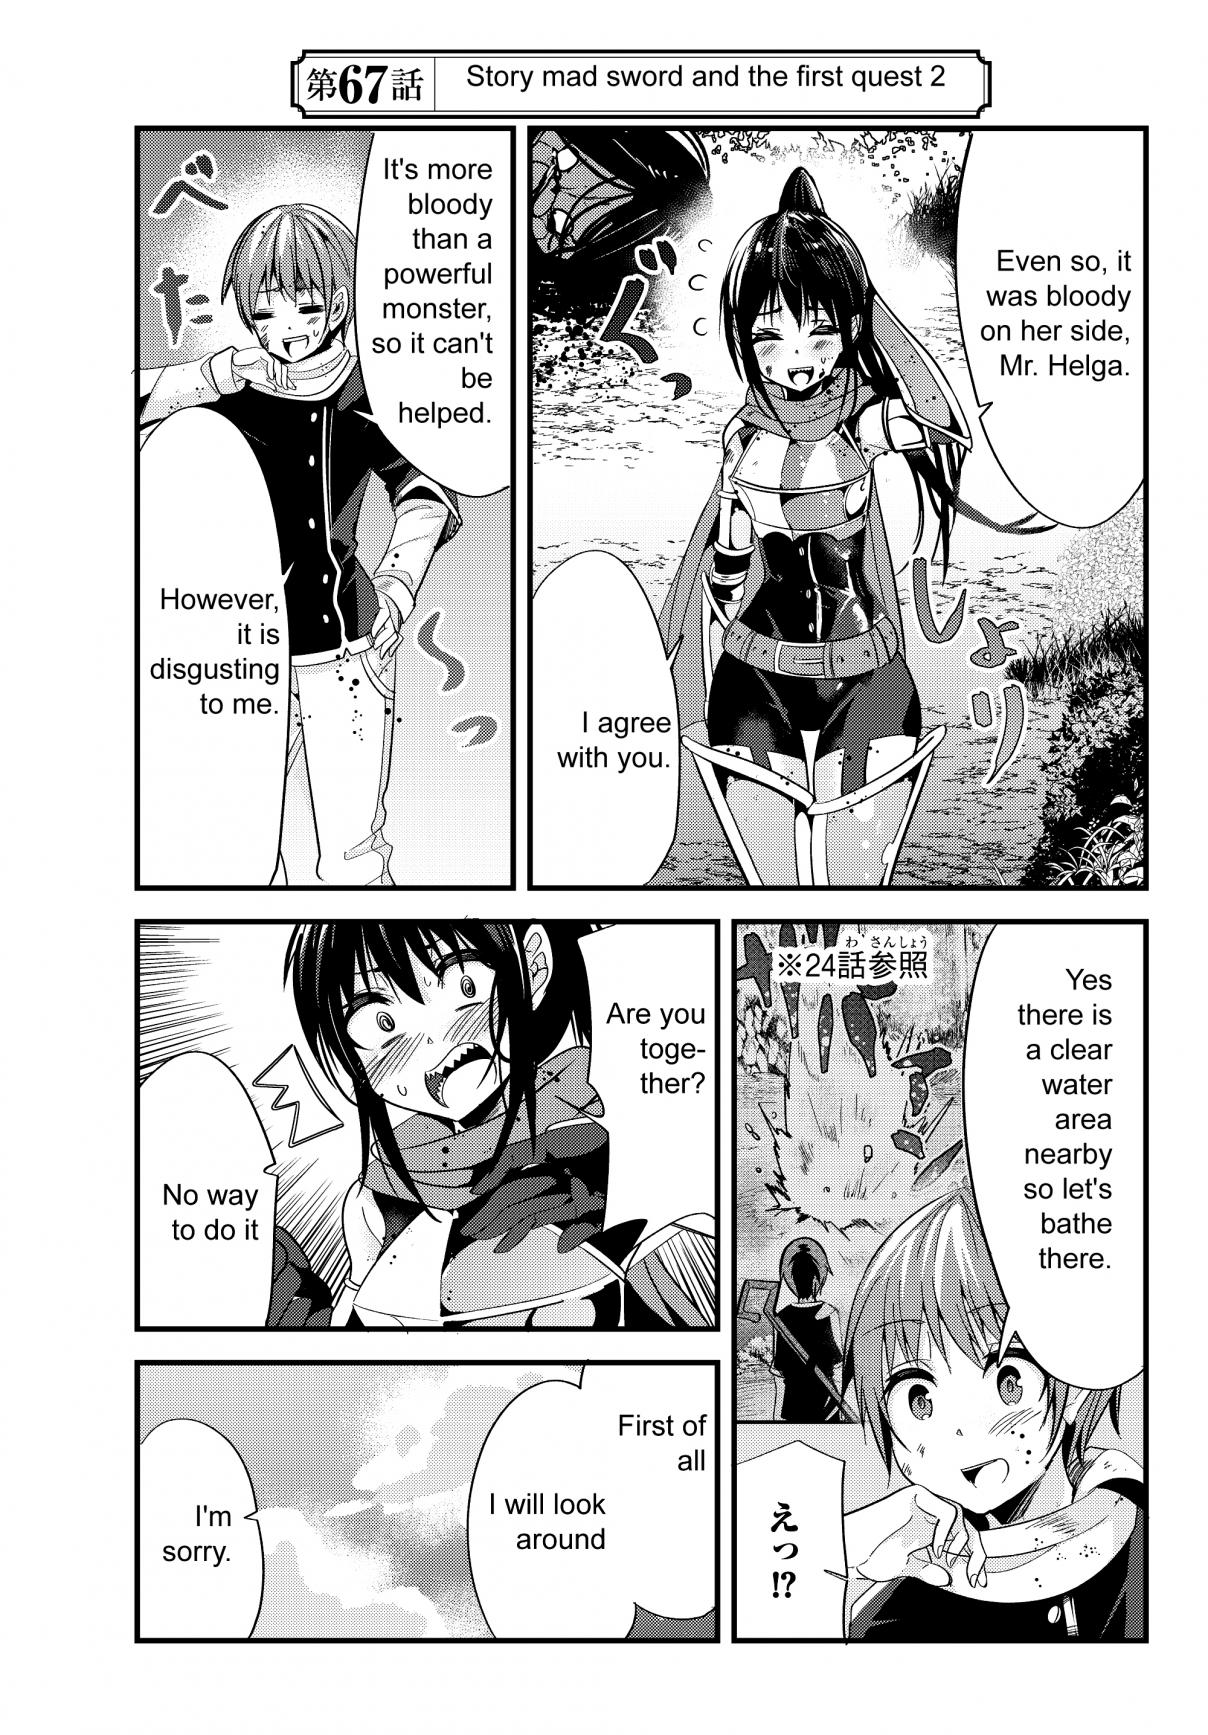 A Story About Treating a Female Knight, Who Has Never Been Treated as a Woman, as a Woman Ch. 67 Story Mad Sword and the First Quest 2